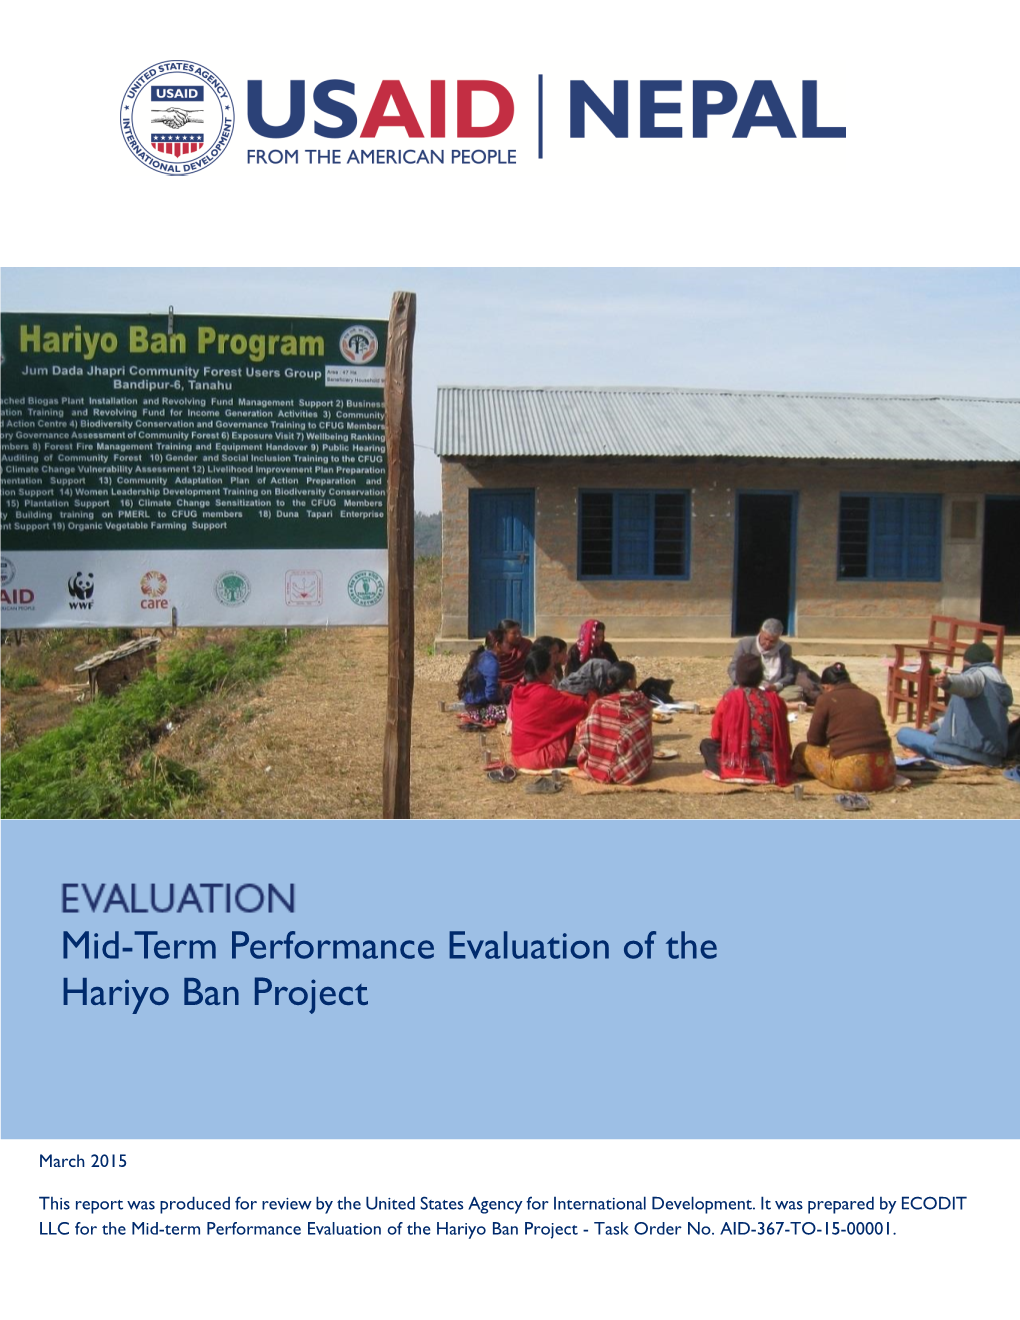 Mid-Term Performance Evaluation of the Hariyo Ban Project